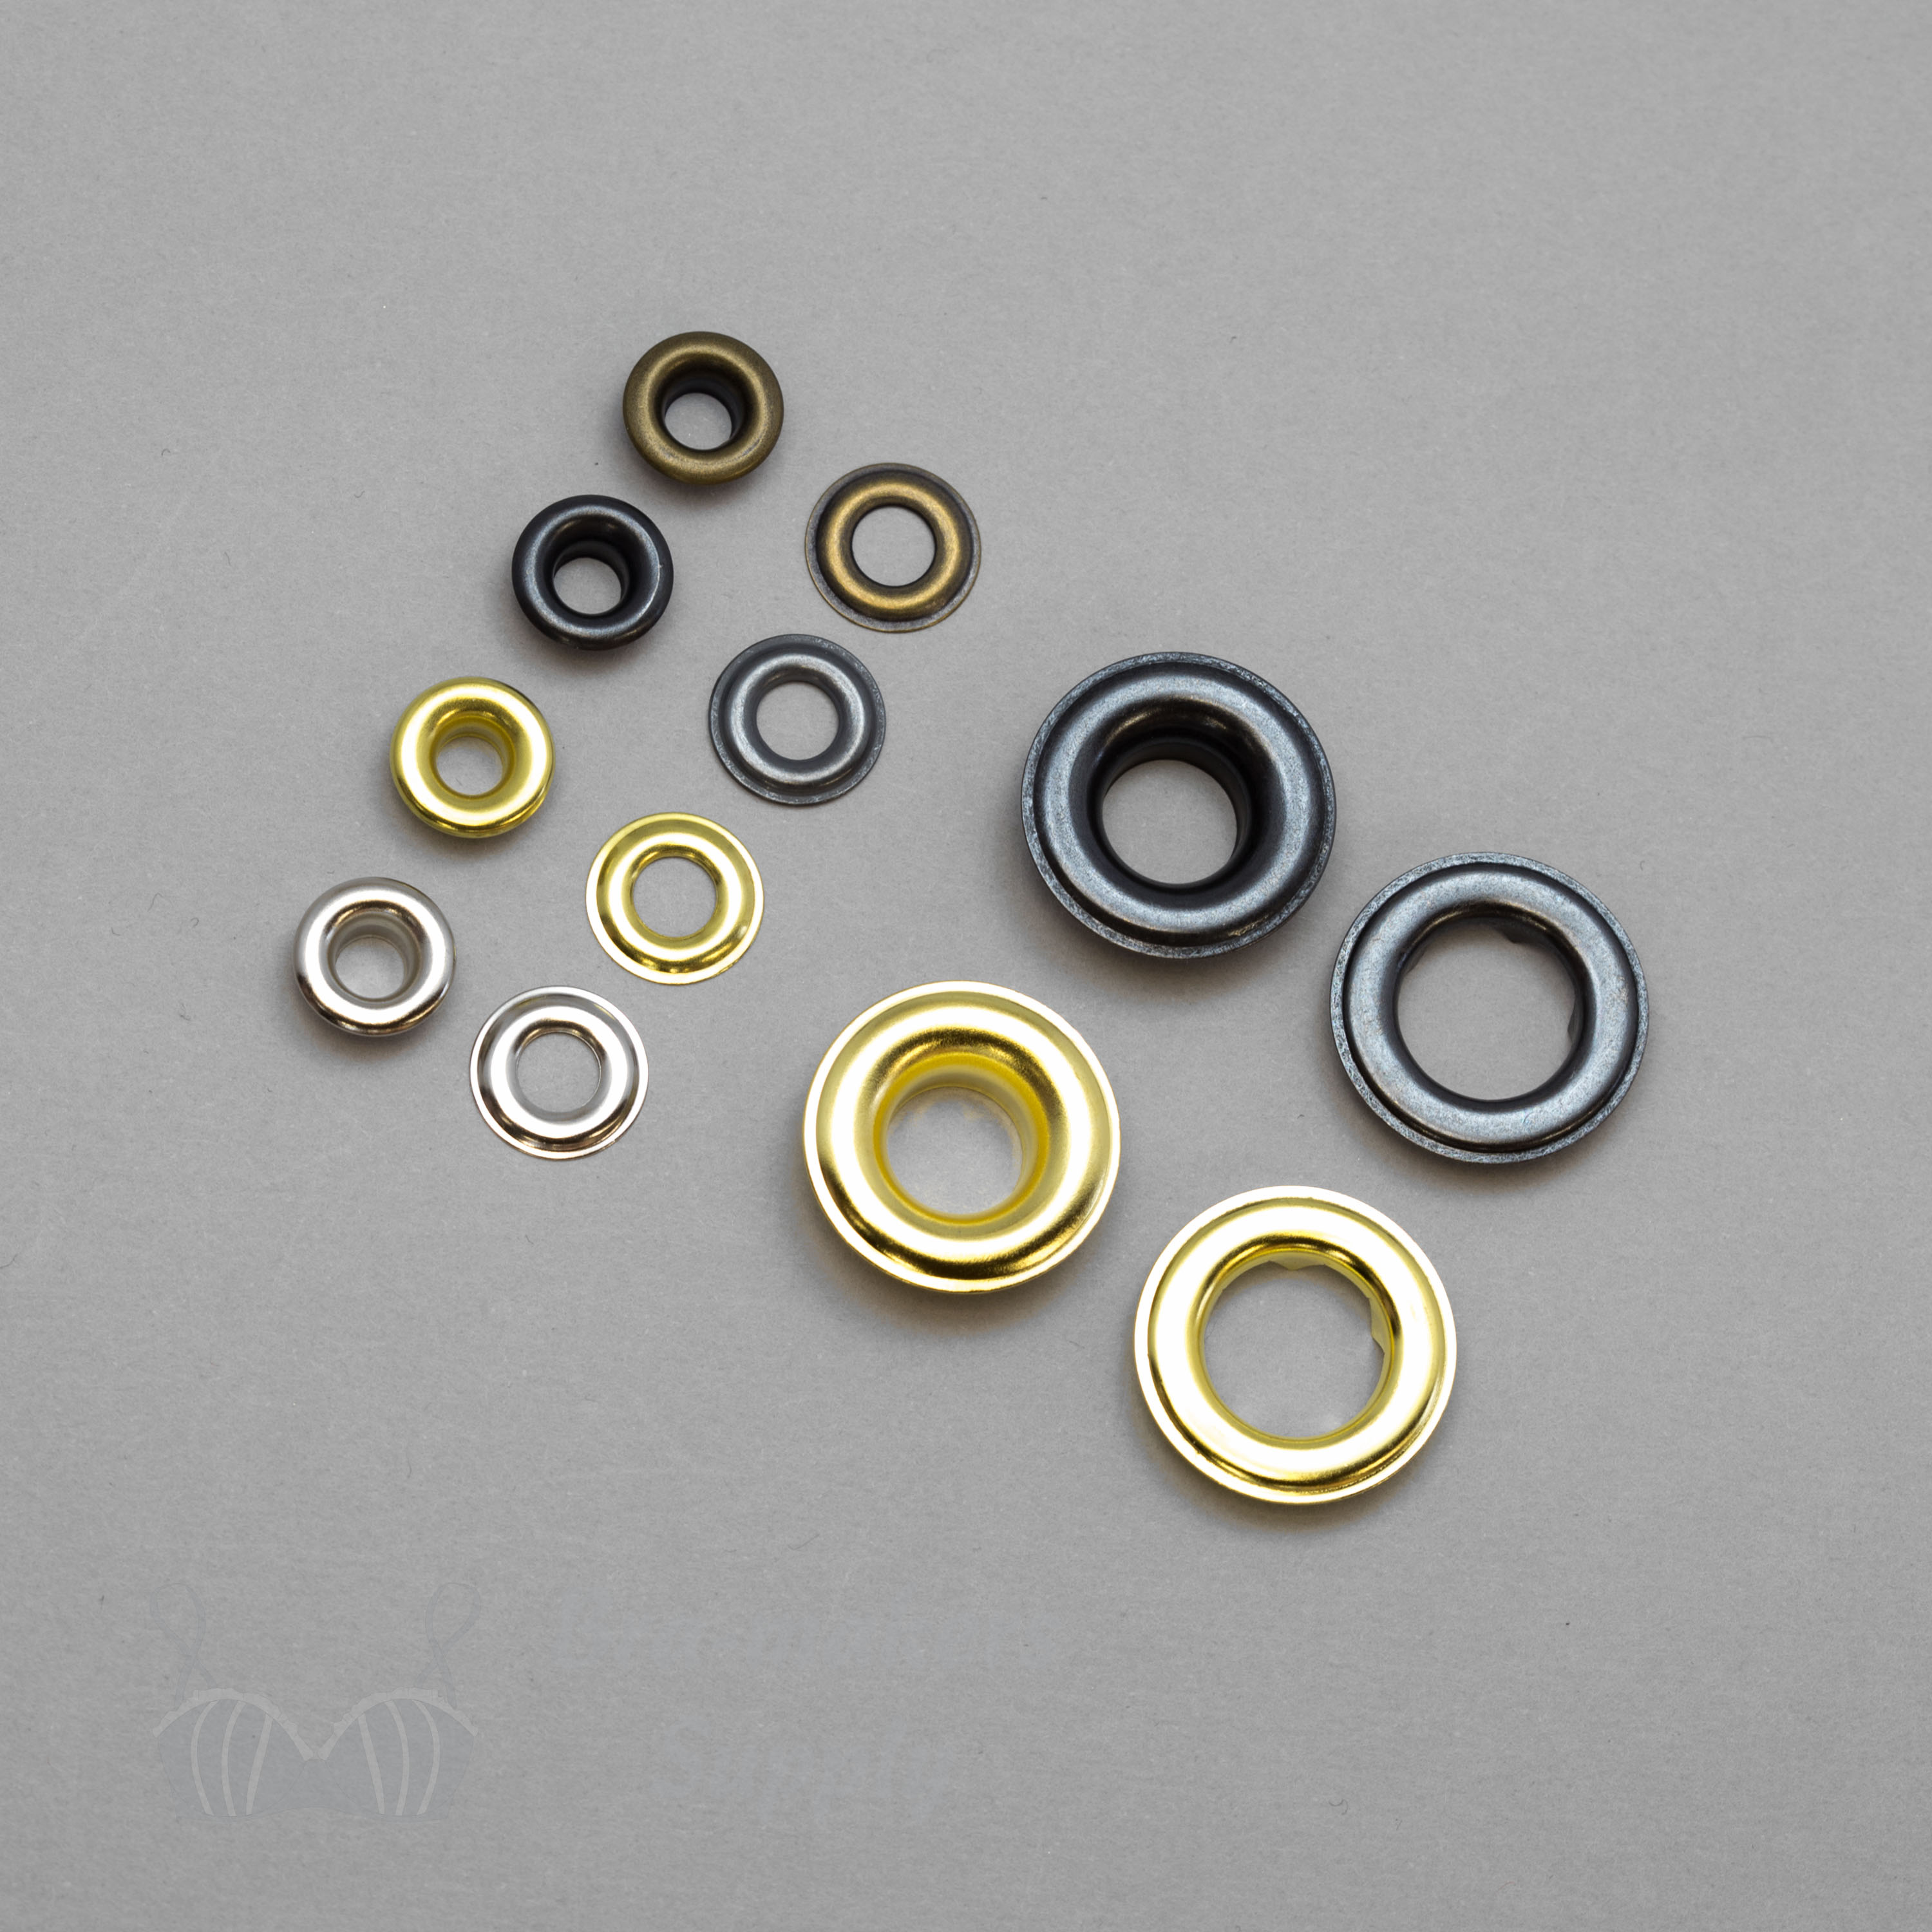 Eyelets & Grommets: What's the Difference?